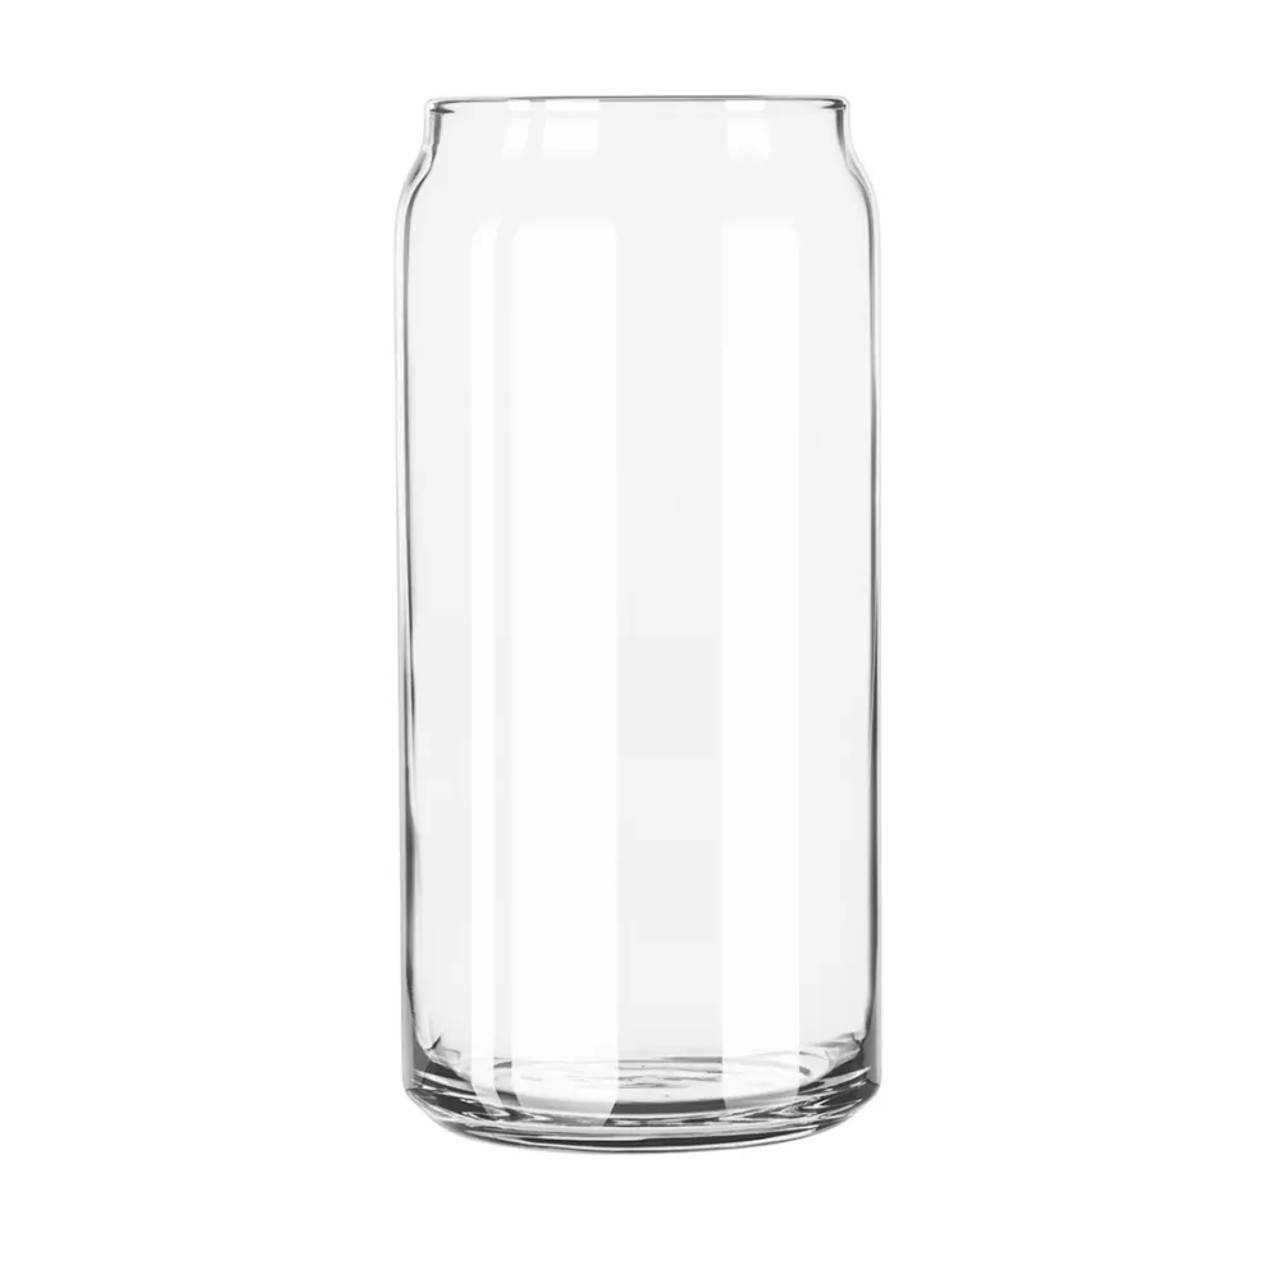 Libbey 266 20 oz Beer Can Glass, Clear - Safedge, Contemporary Design, 12/Case - Chicken Pieces